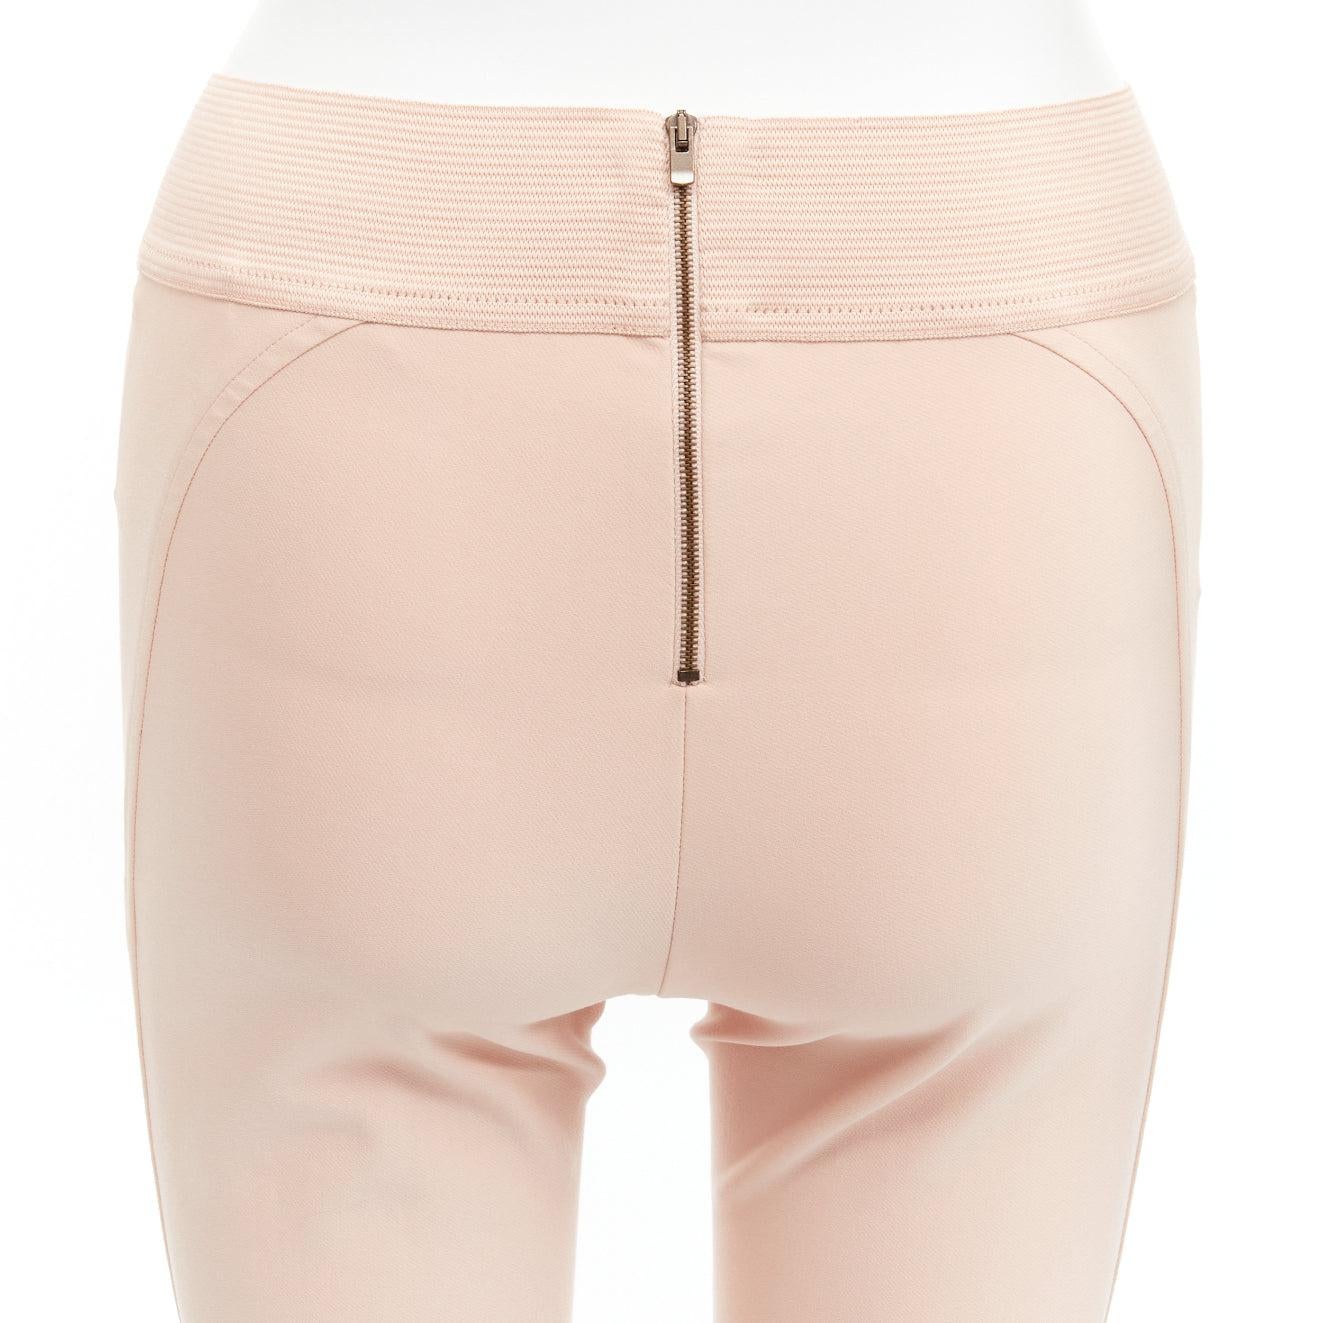 STELLA MCCARTNEY nude elasticated waistband motocycle legging pants IT38 XS
Reference: LNKO/A02182
Brand: Stella McCartney
Designer: Stella McCartney
Collection: 2014
Material: Cotton, Blend
Color: Nude
Pattern: Solid
Closure: Elasticated
Extra